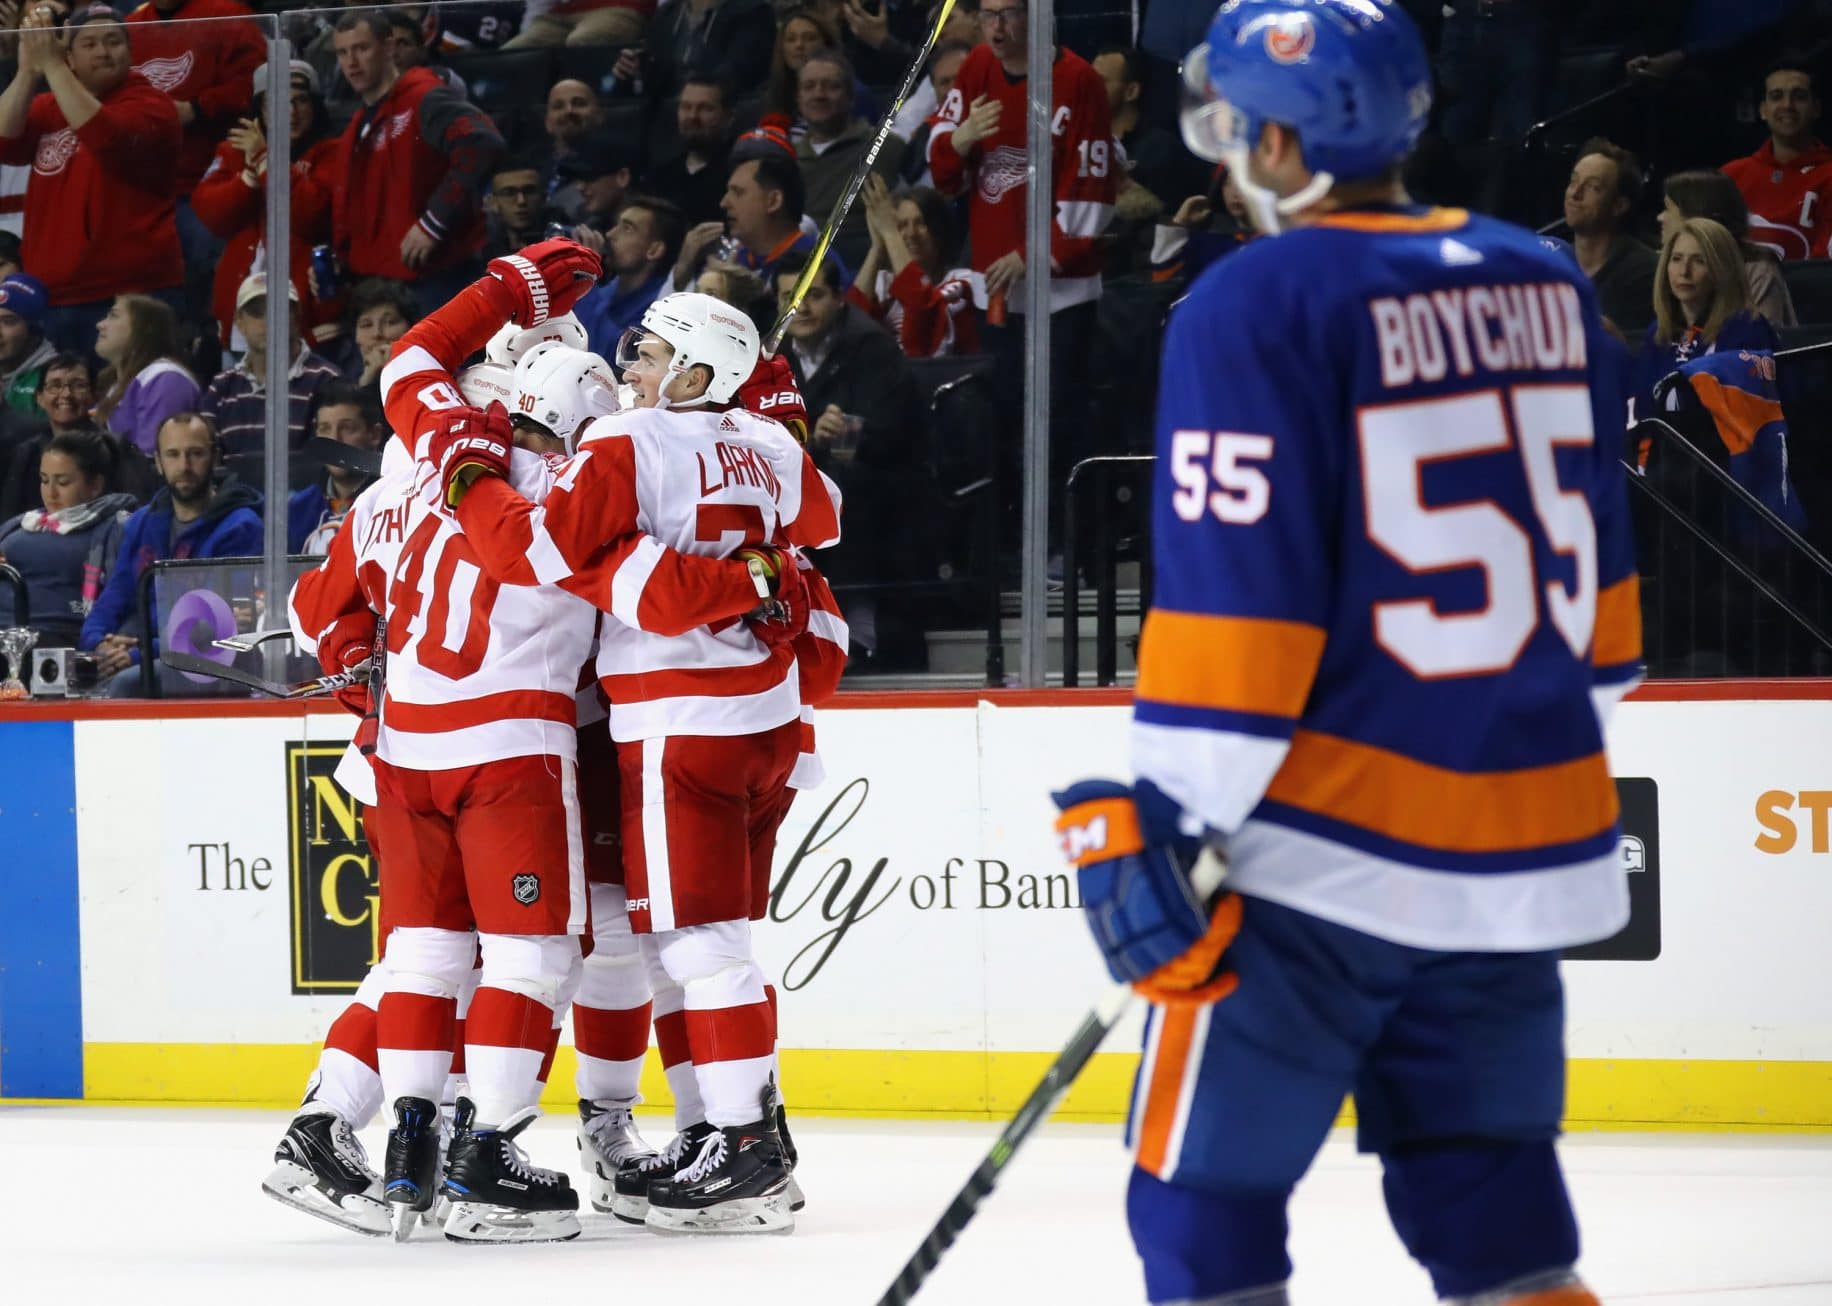 New York Islanders 3, Detroit Red Wings 6: Another third-period collapse